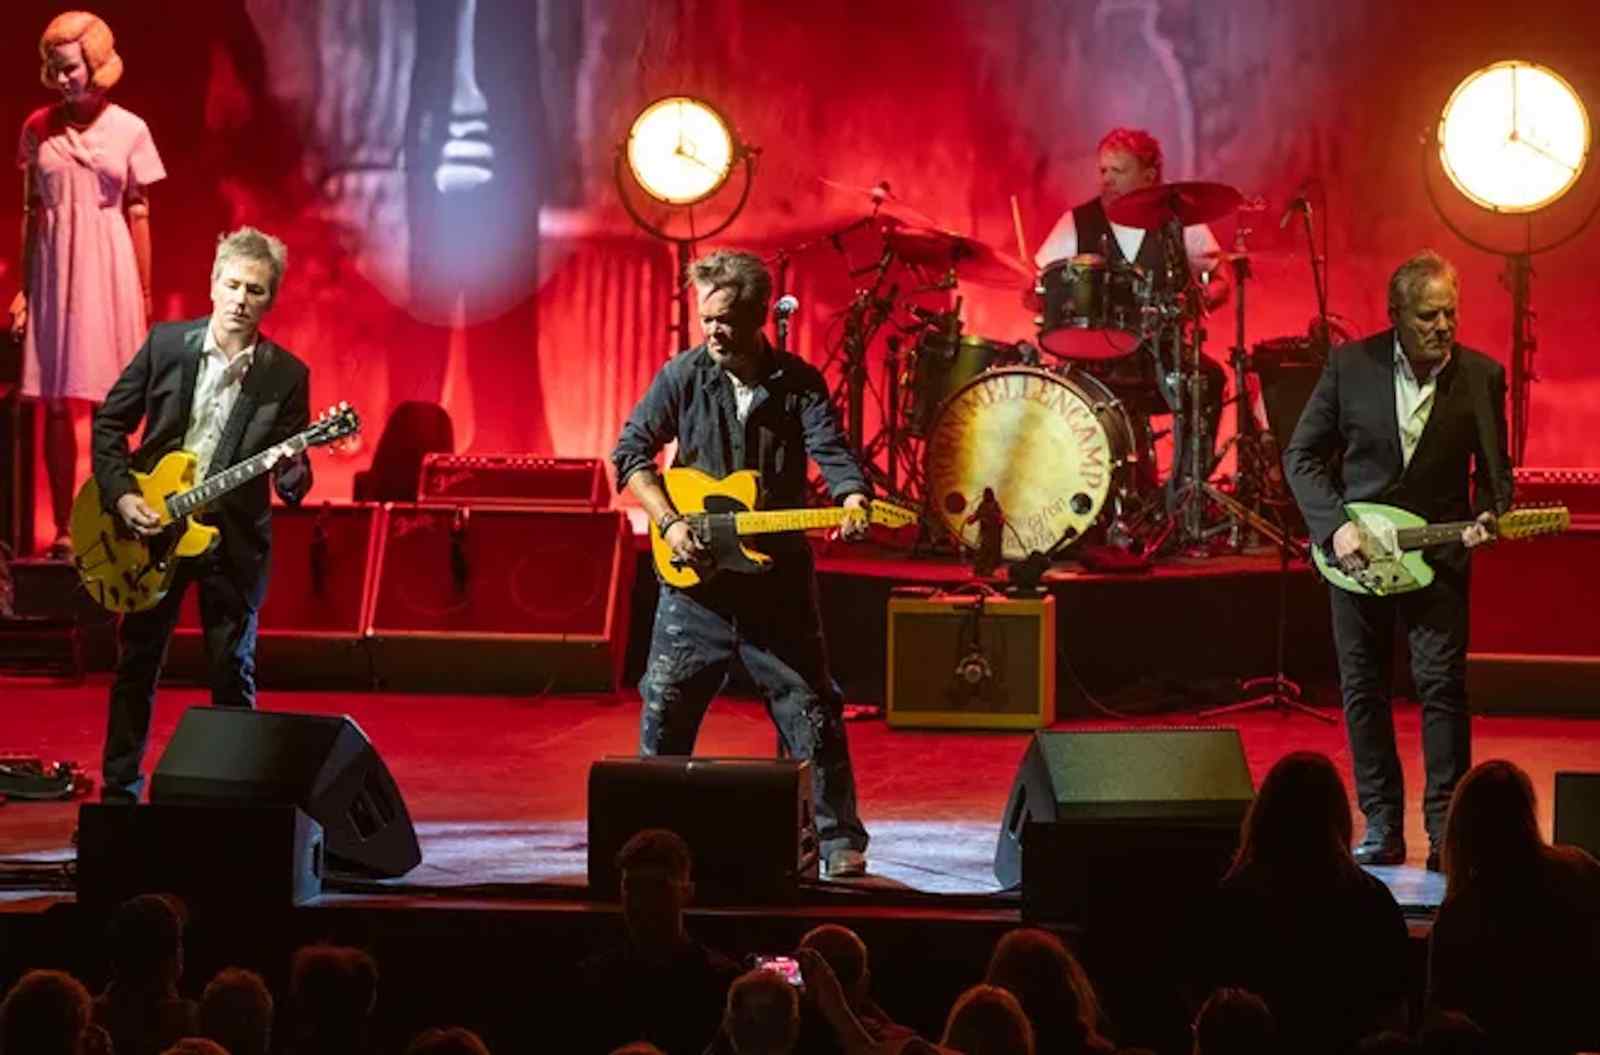 Worcester Telegram and Gazette: John Mellencamp delivers high energy, nuanced songwriting at Hanover Theatre performance